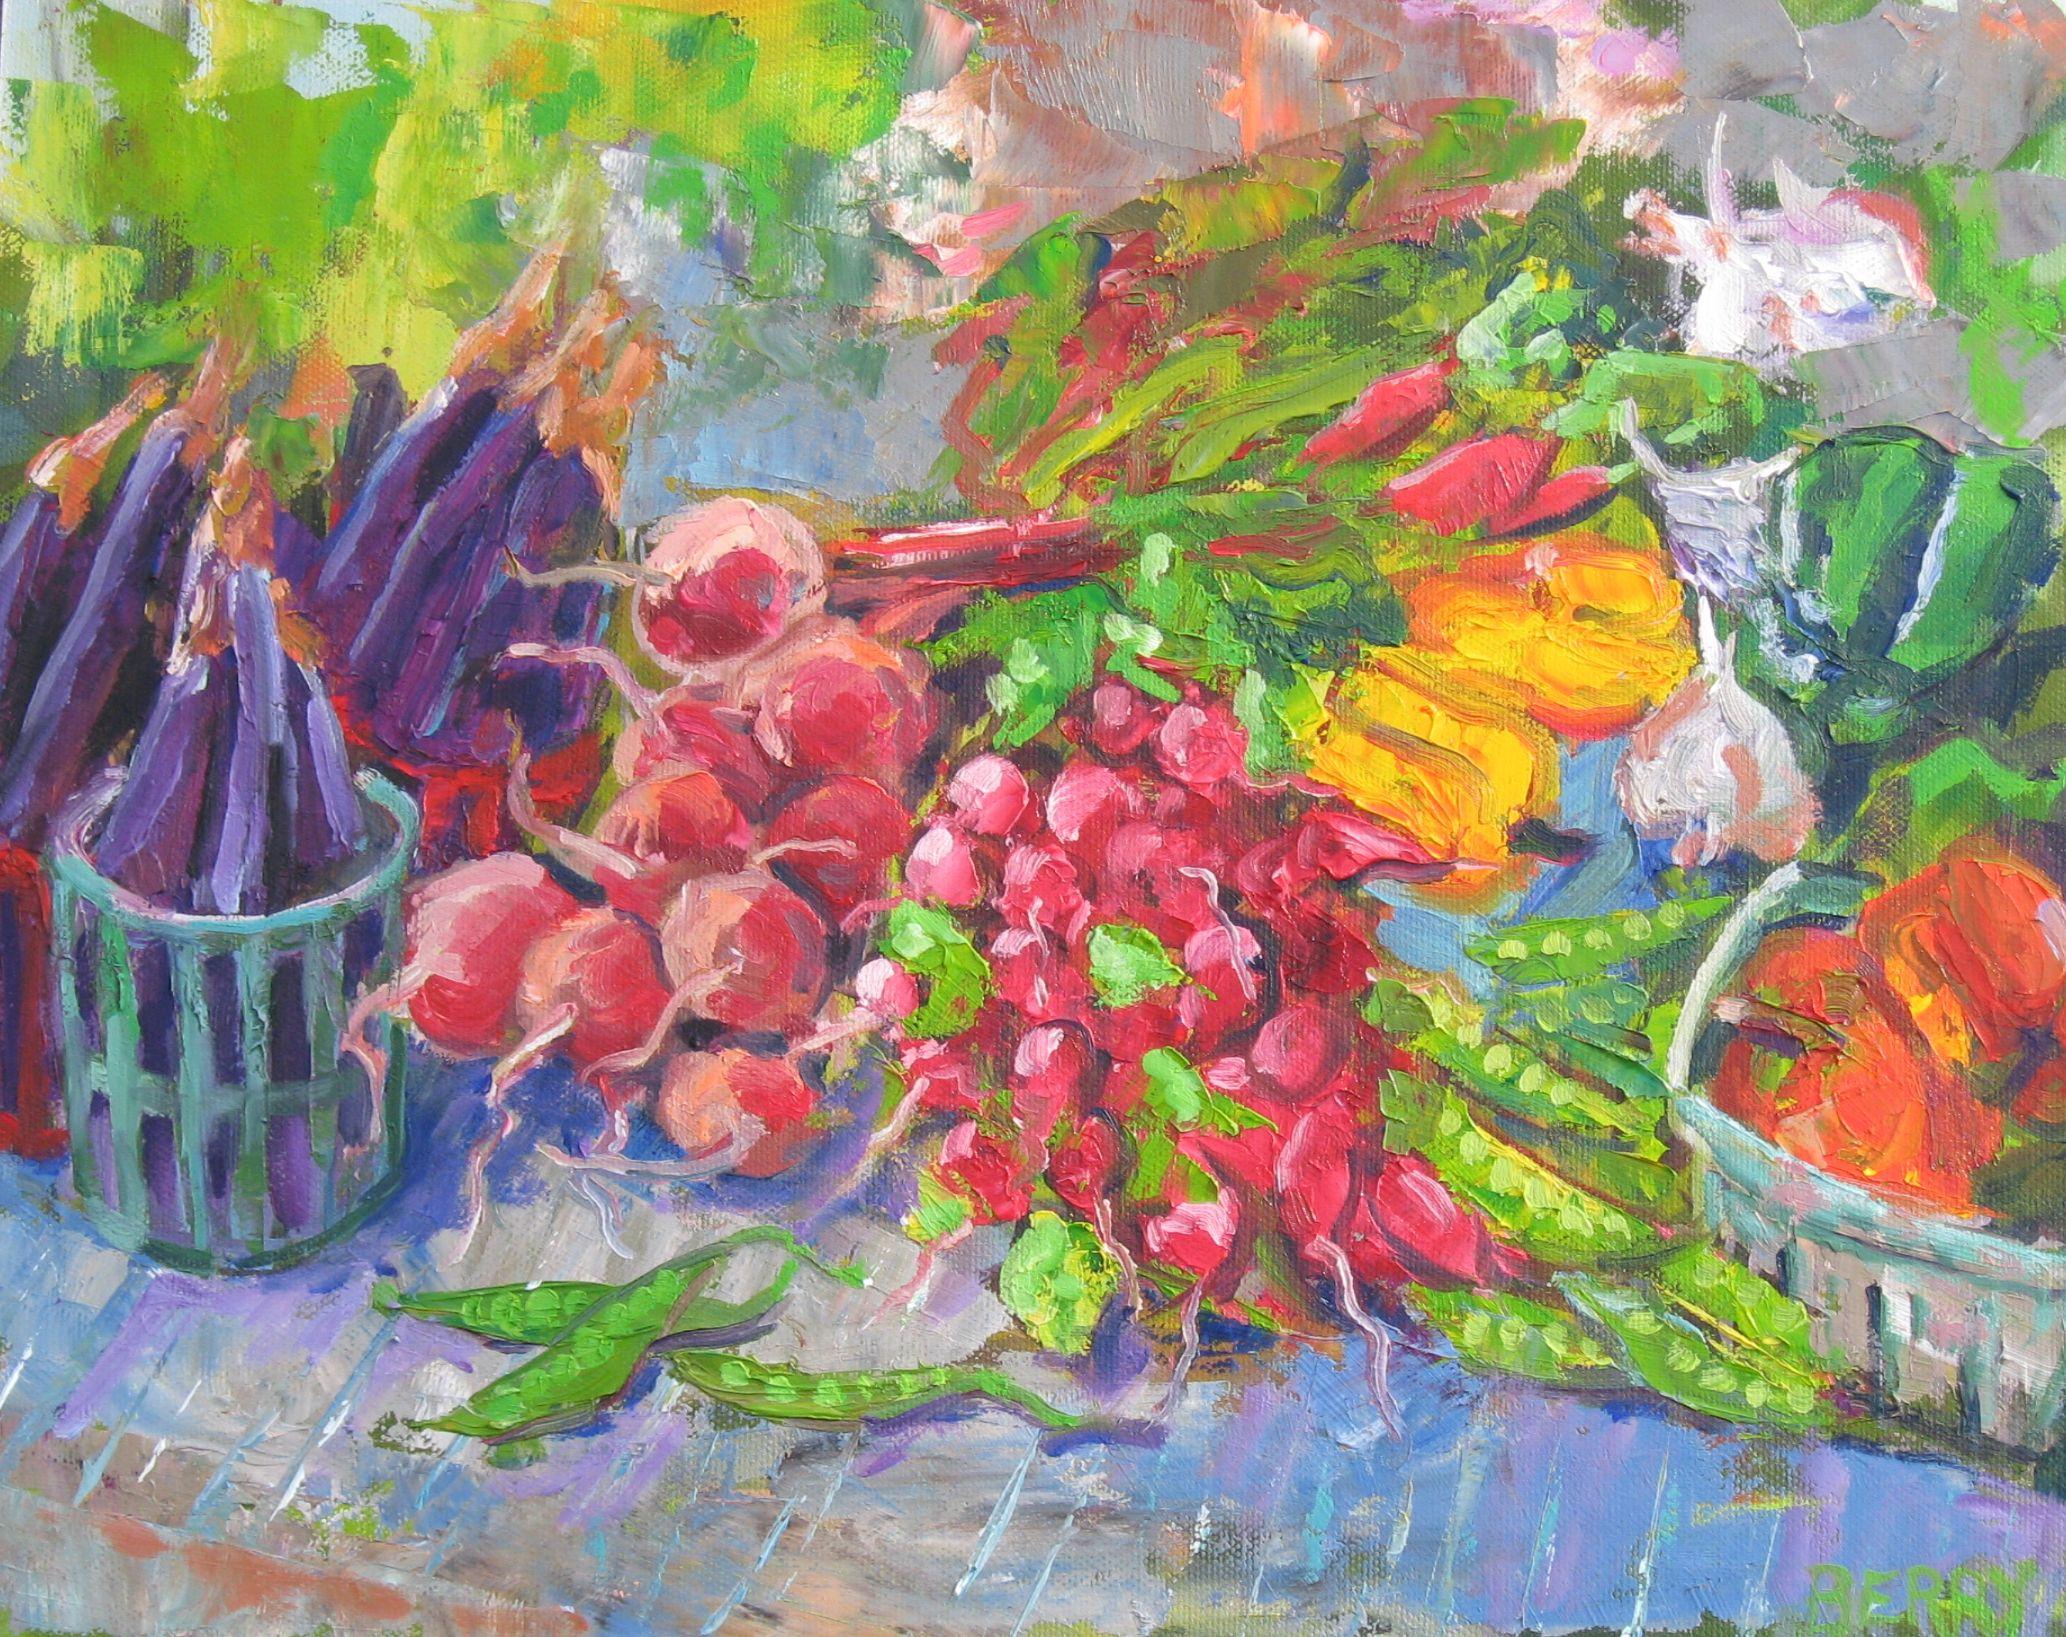 The vibrant display at farmers' markets is eye candy to me.  I love the little eggplants stacked in mini-baskets and the wide variety of colors.  This was done with quality oil paints on an archival RayMar panel and is framed in a simple gold frame.